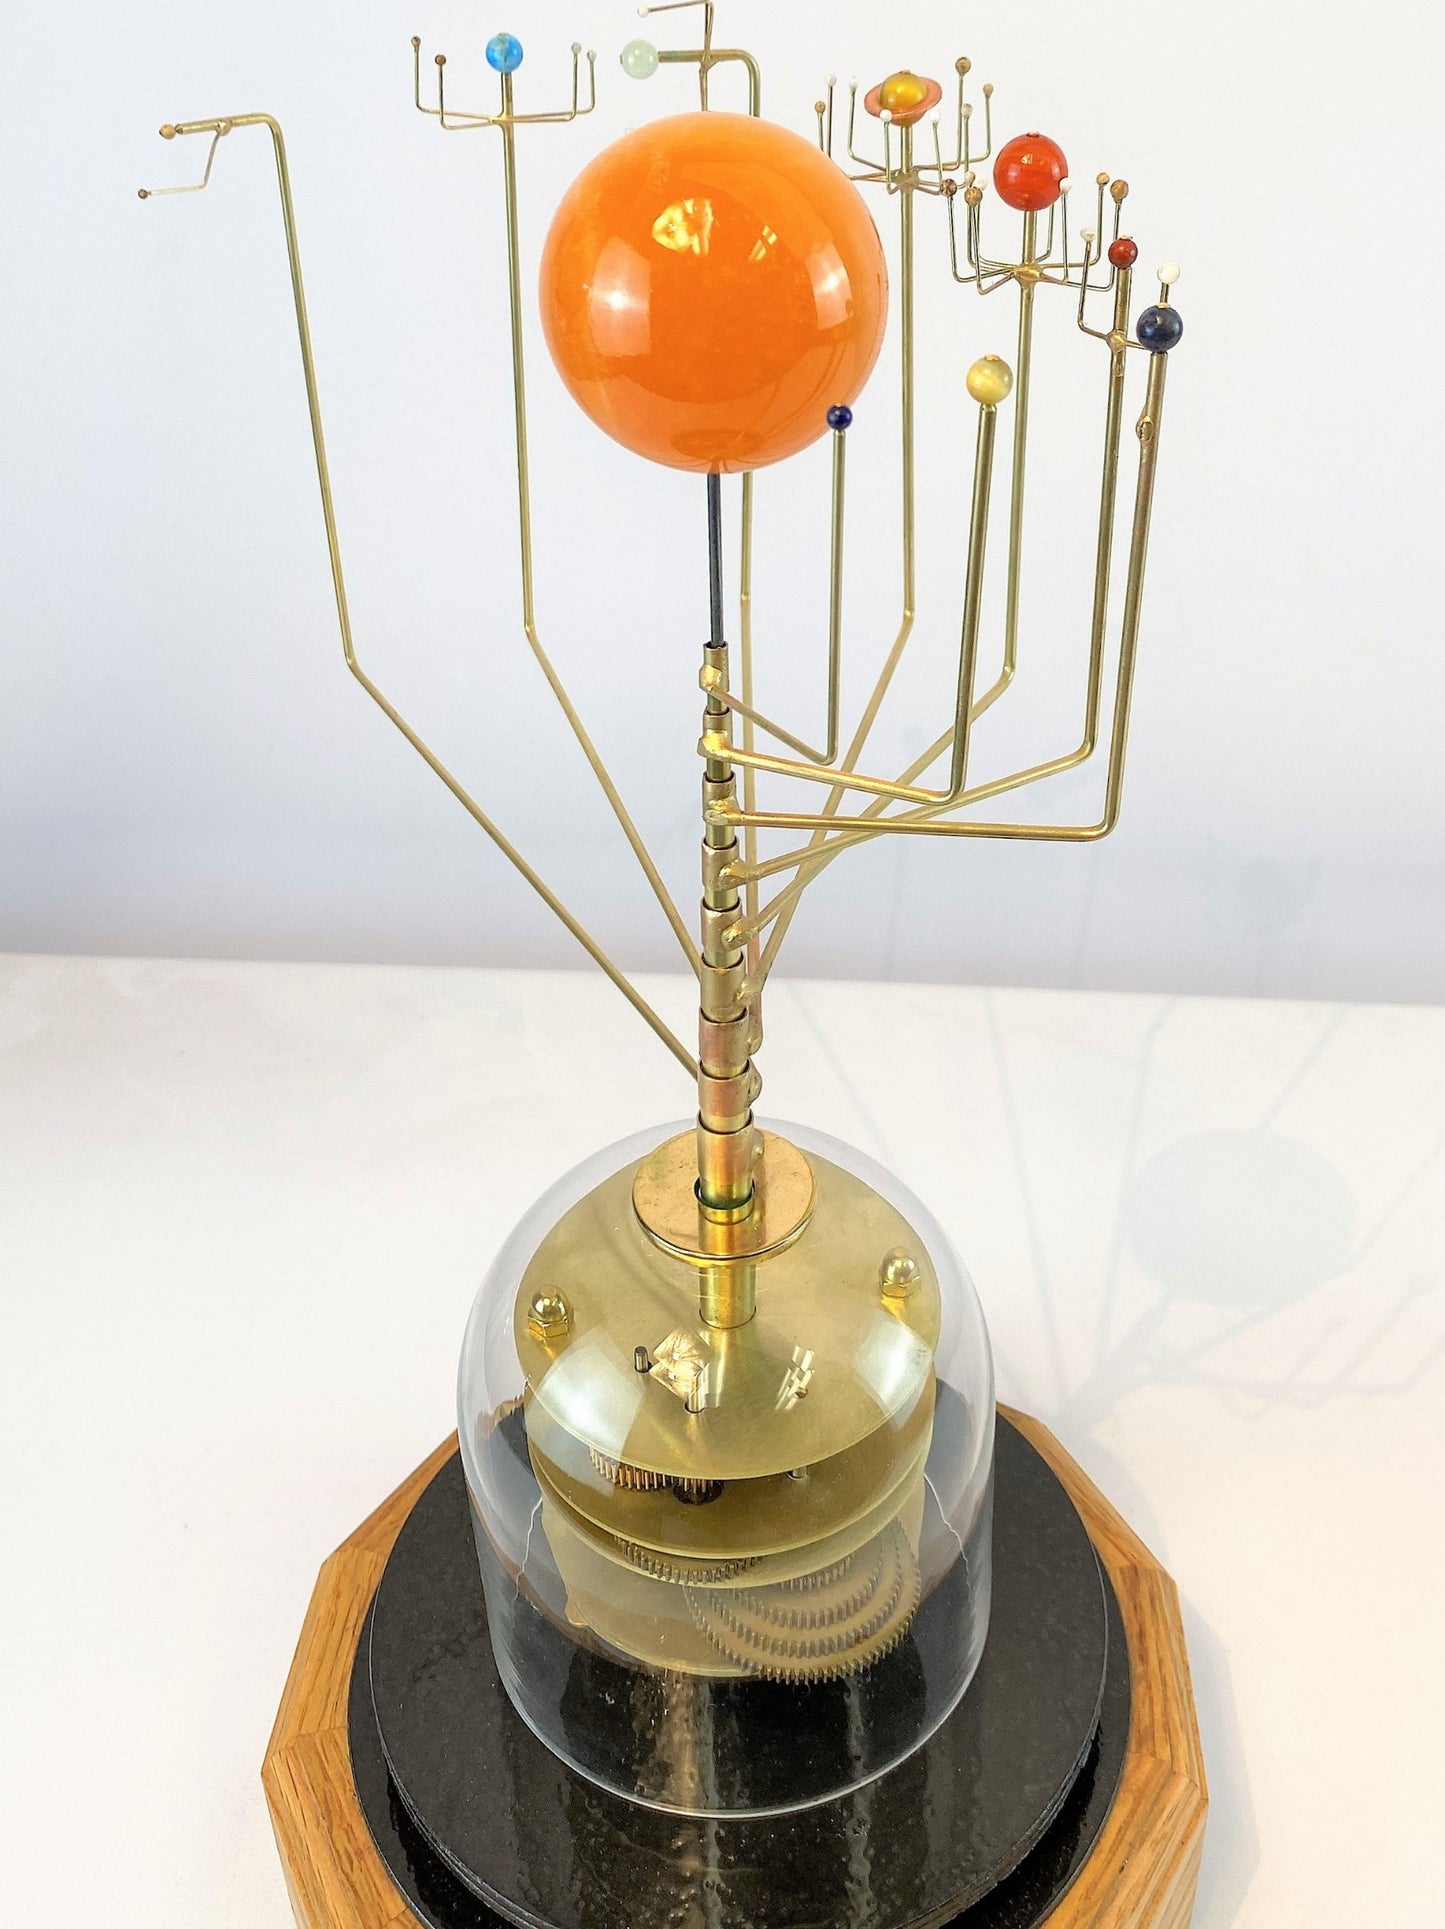 Wanderers Orrery from Scienceart.com with semi-precious stone planets and brass gears under glass dome